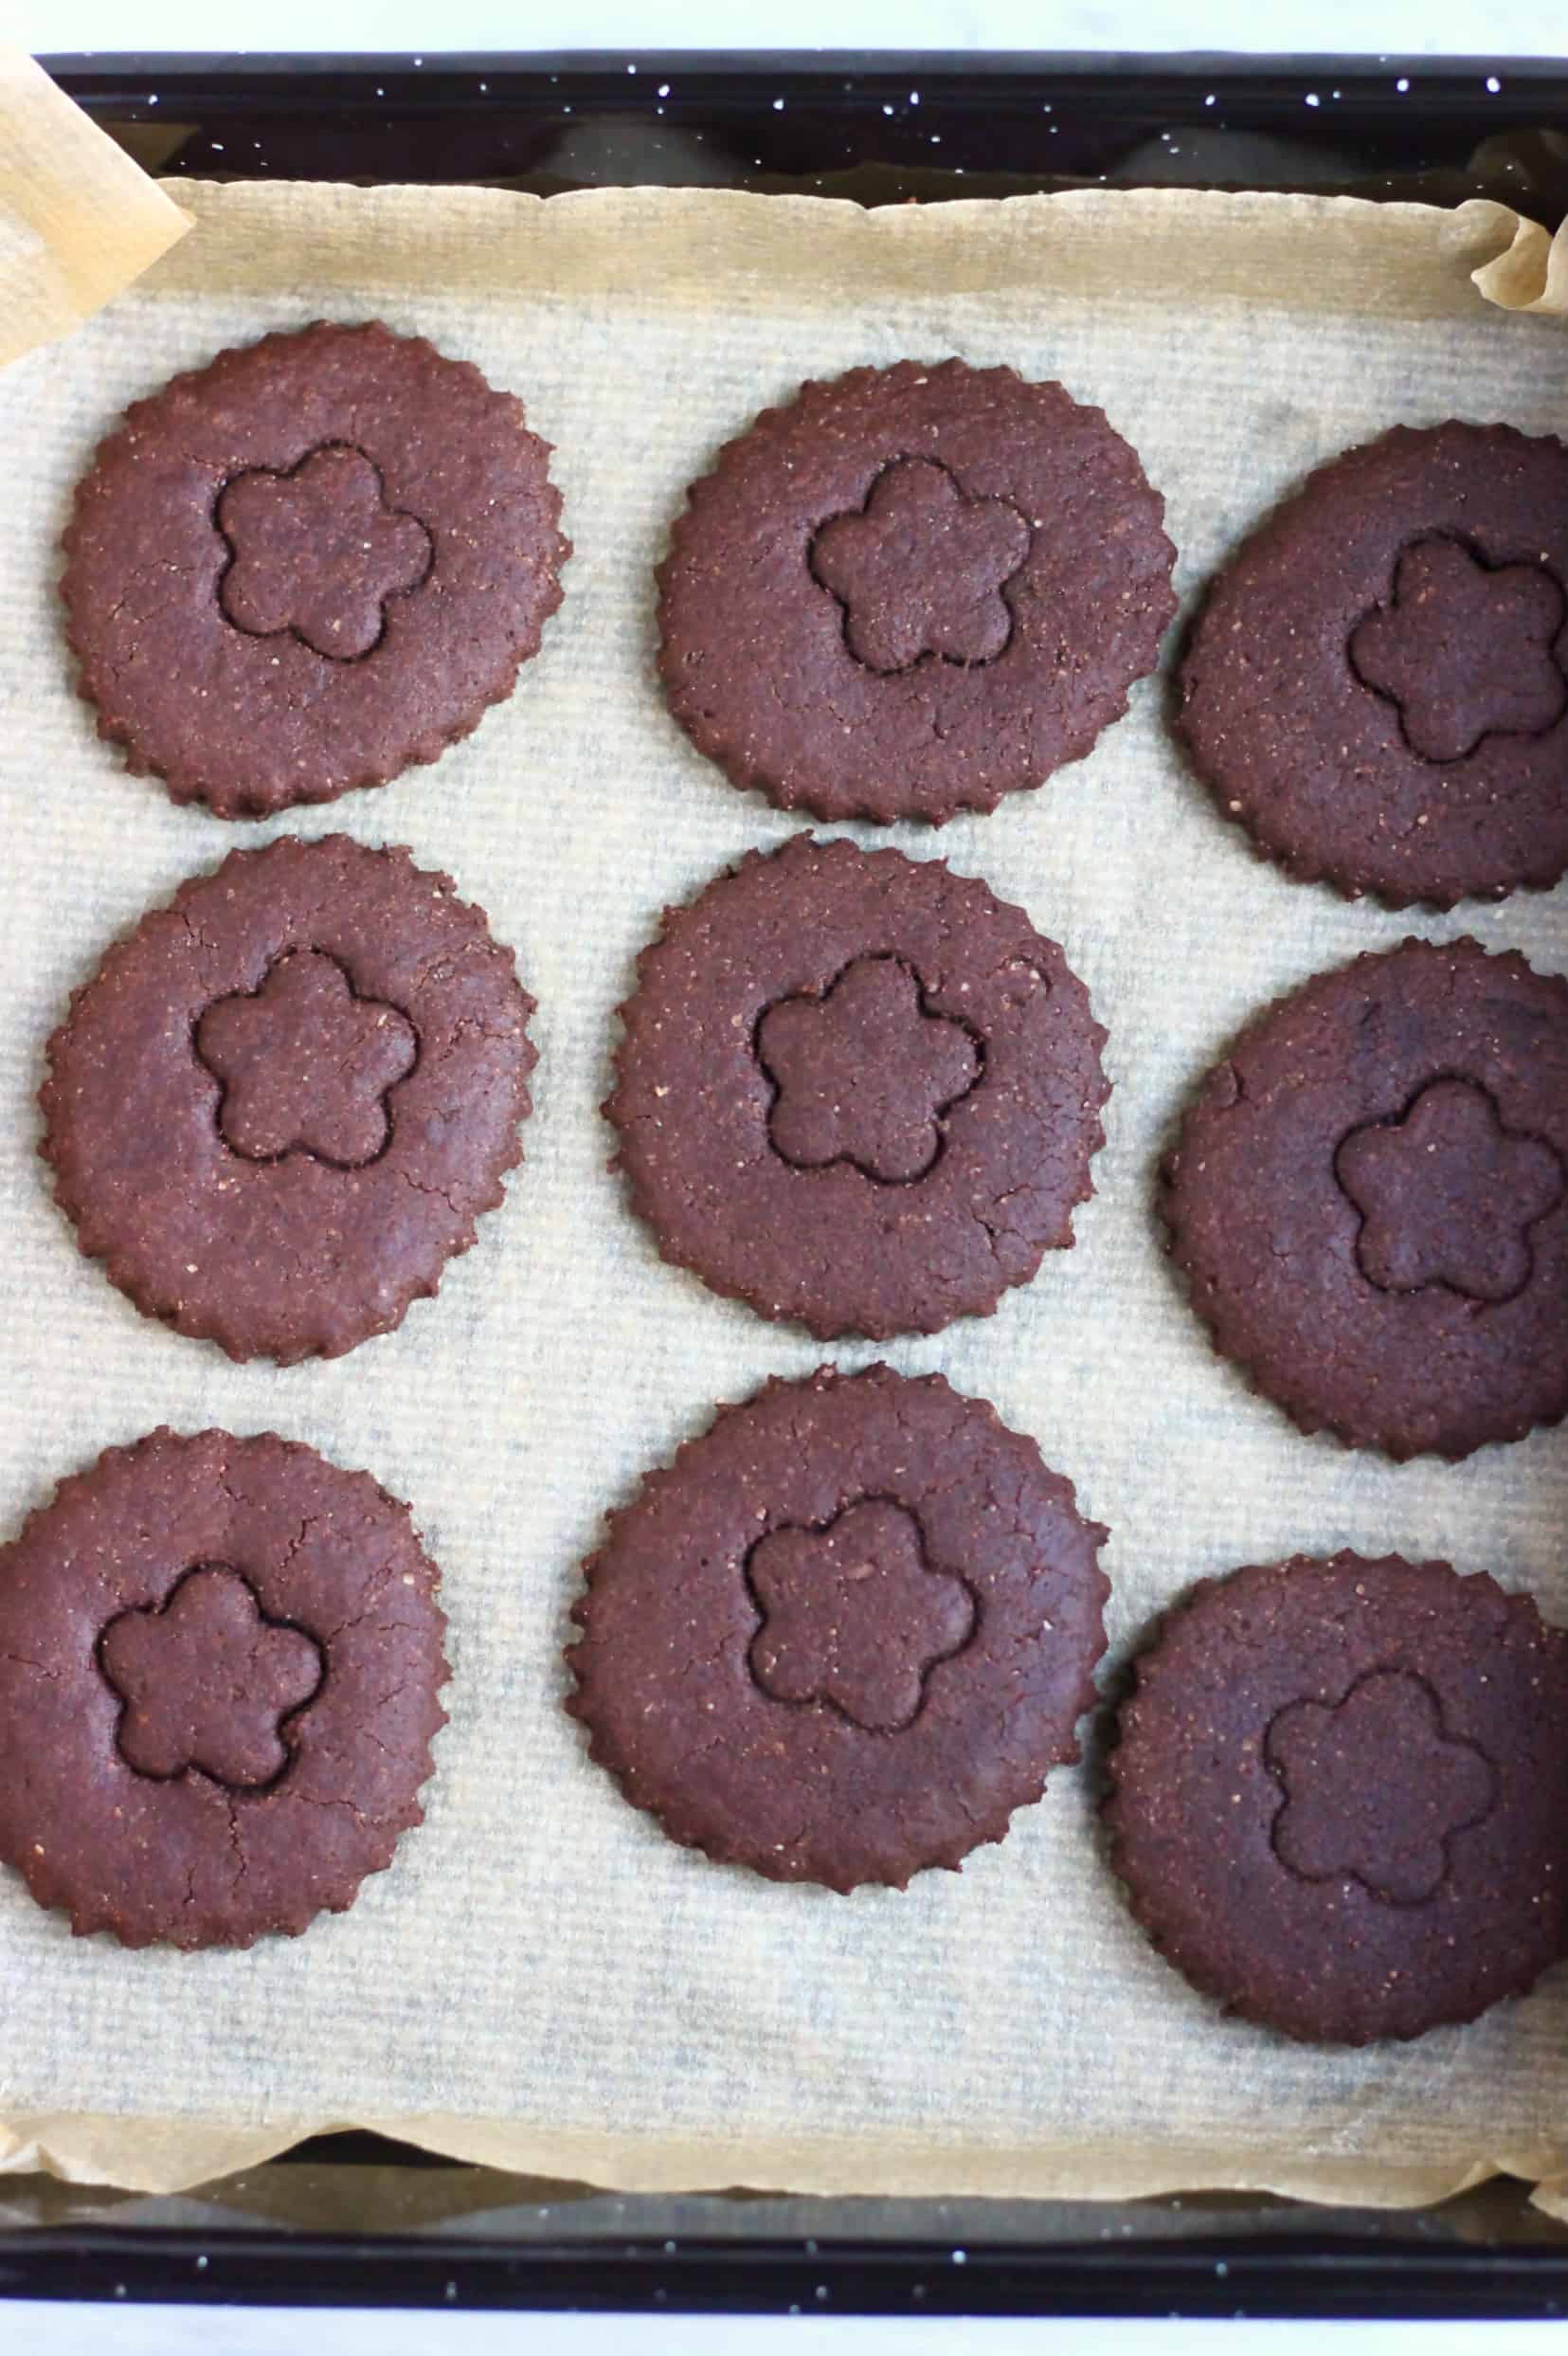 Nine gluten-free vegan homemade oreo cookie circles decorated with a flower pattern on a baking tray lined with baking paper